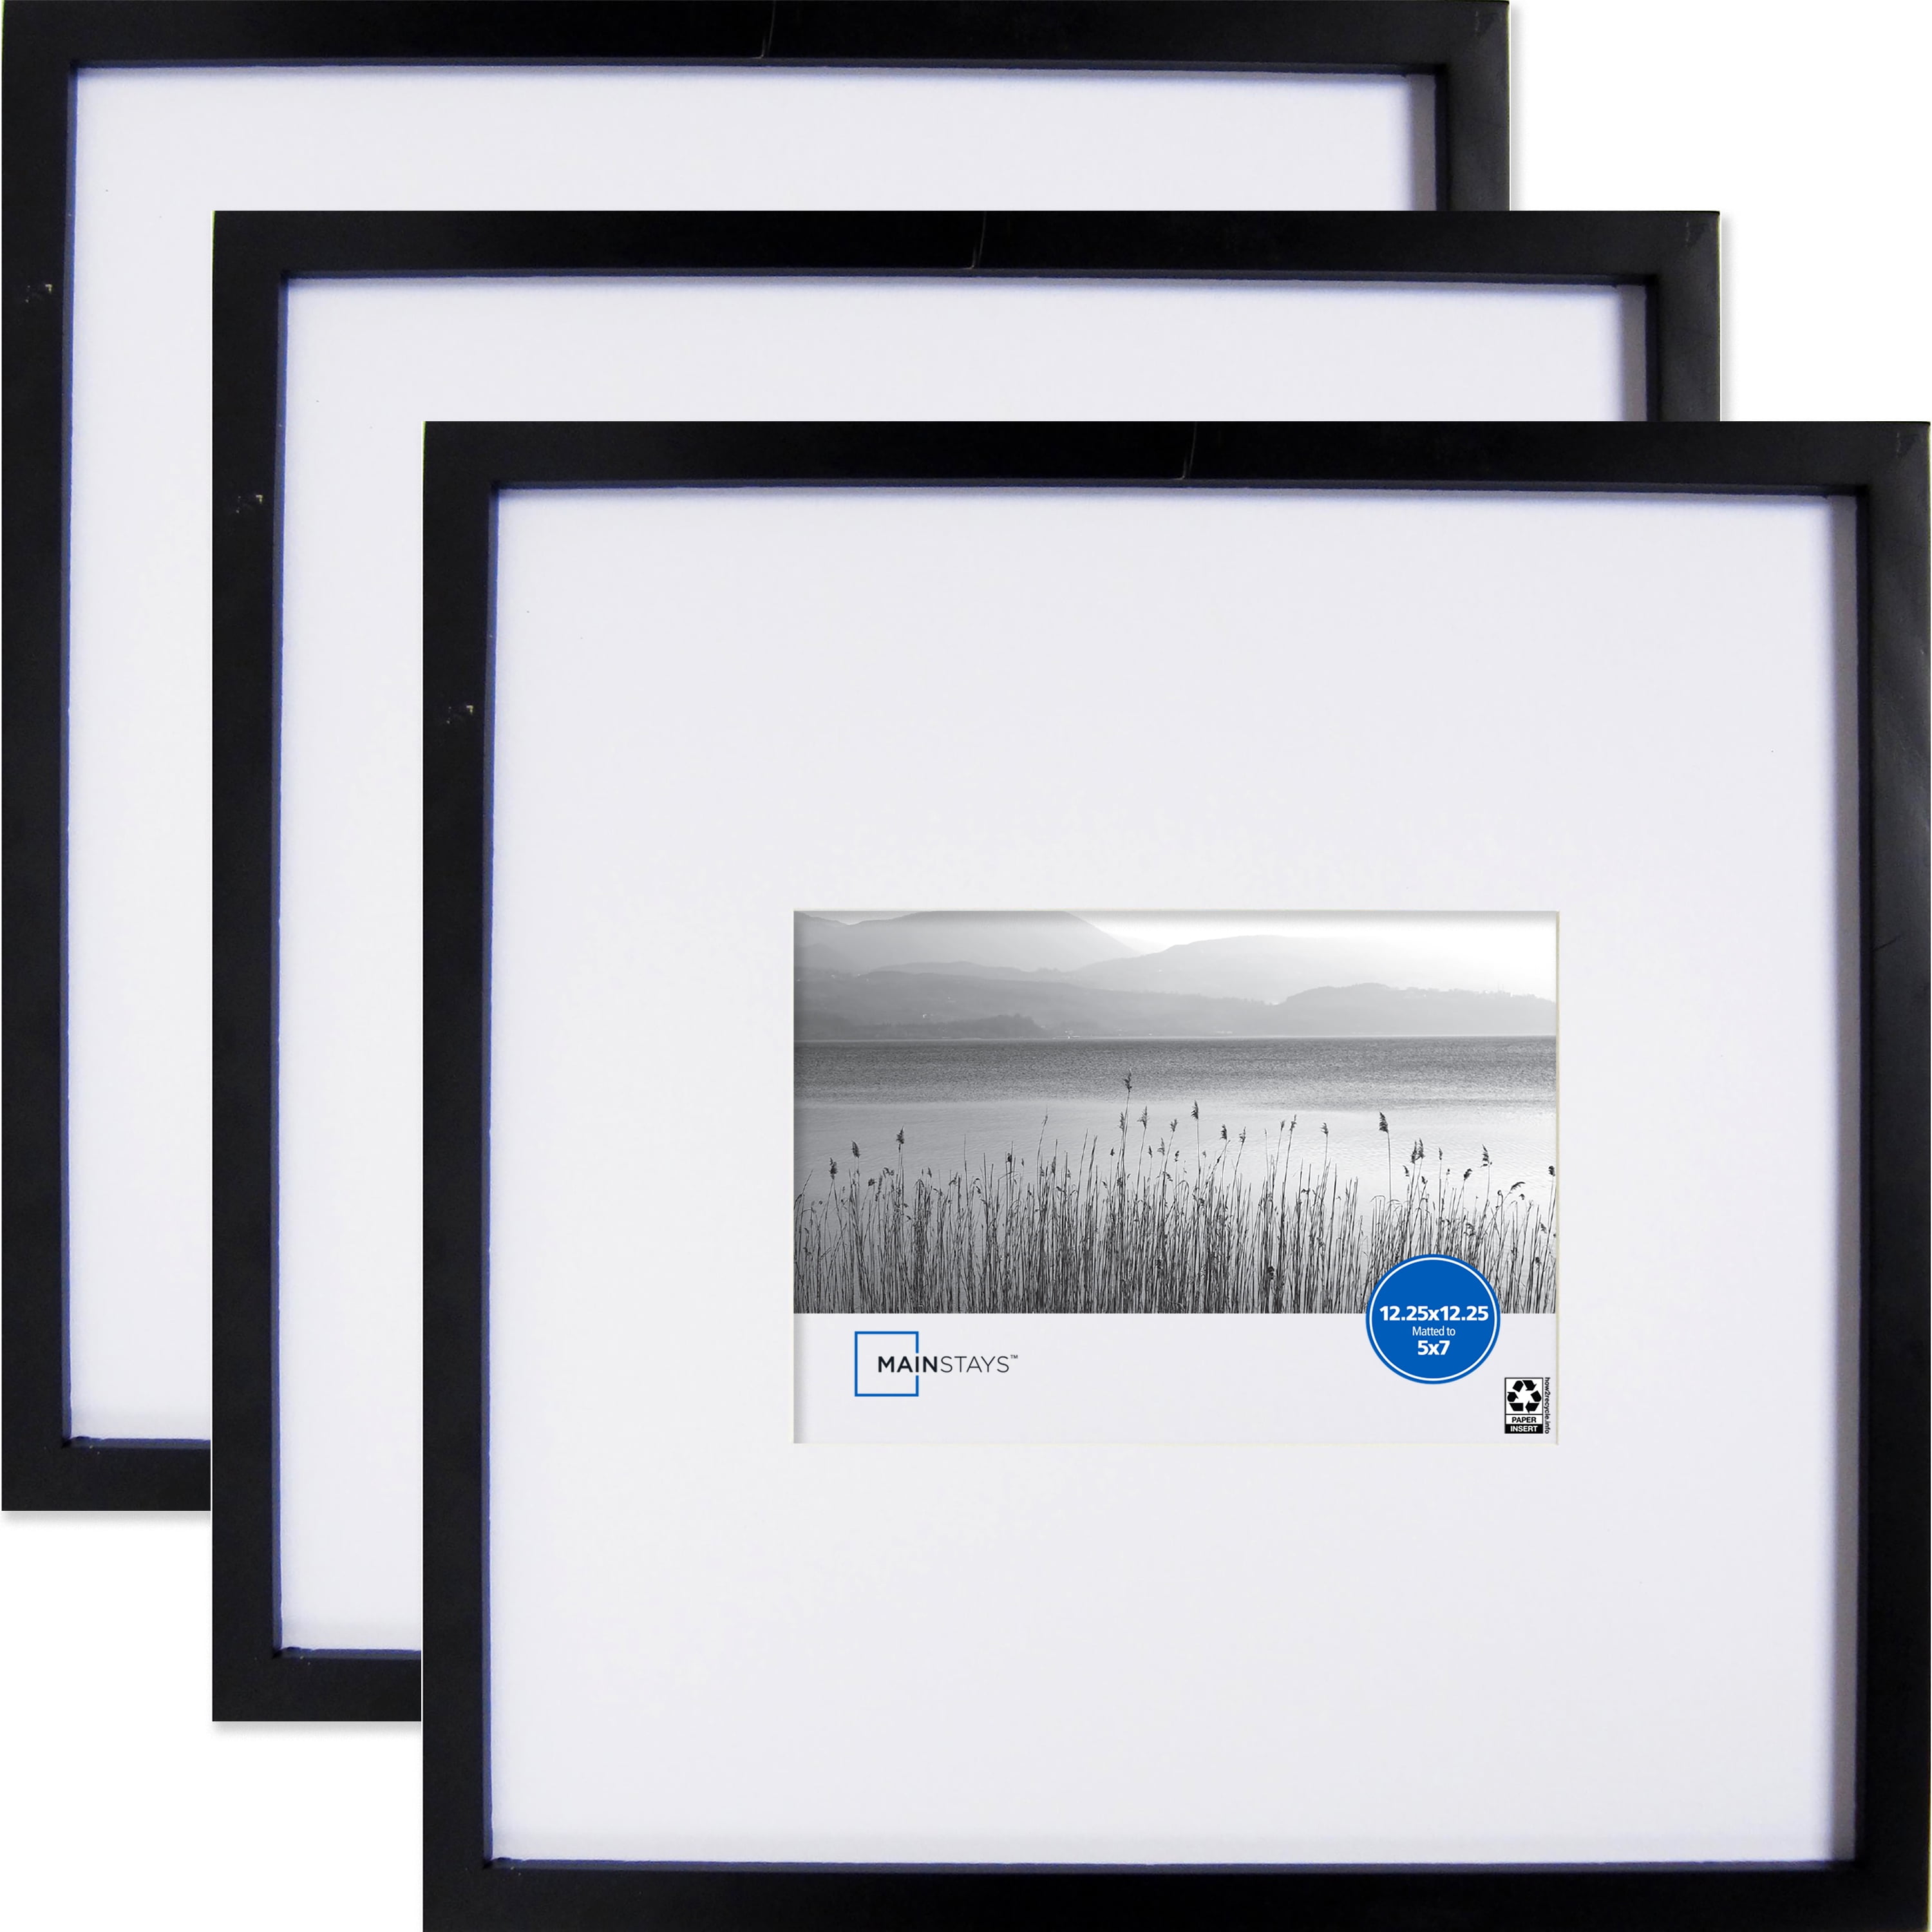 Set of 6-5x7 Natural Light Wood Frames & Clear Glass $12 SHIPPING! 